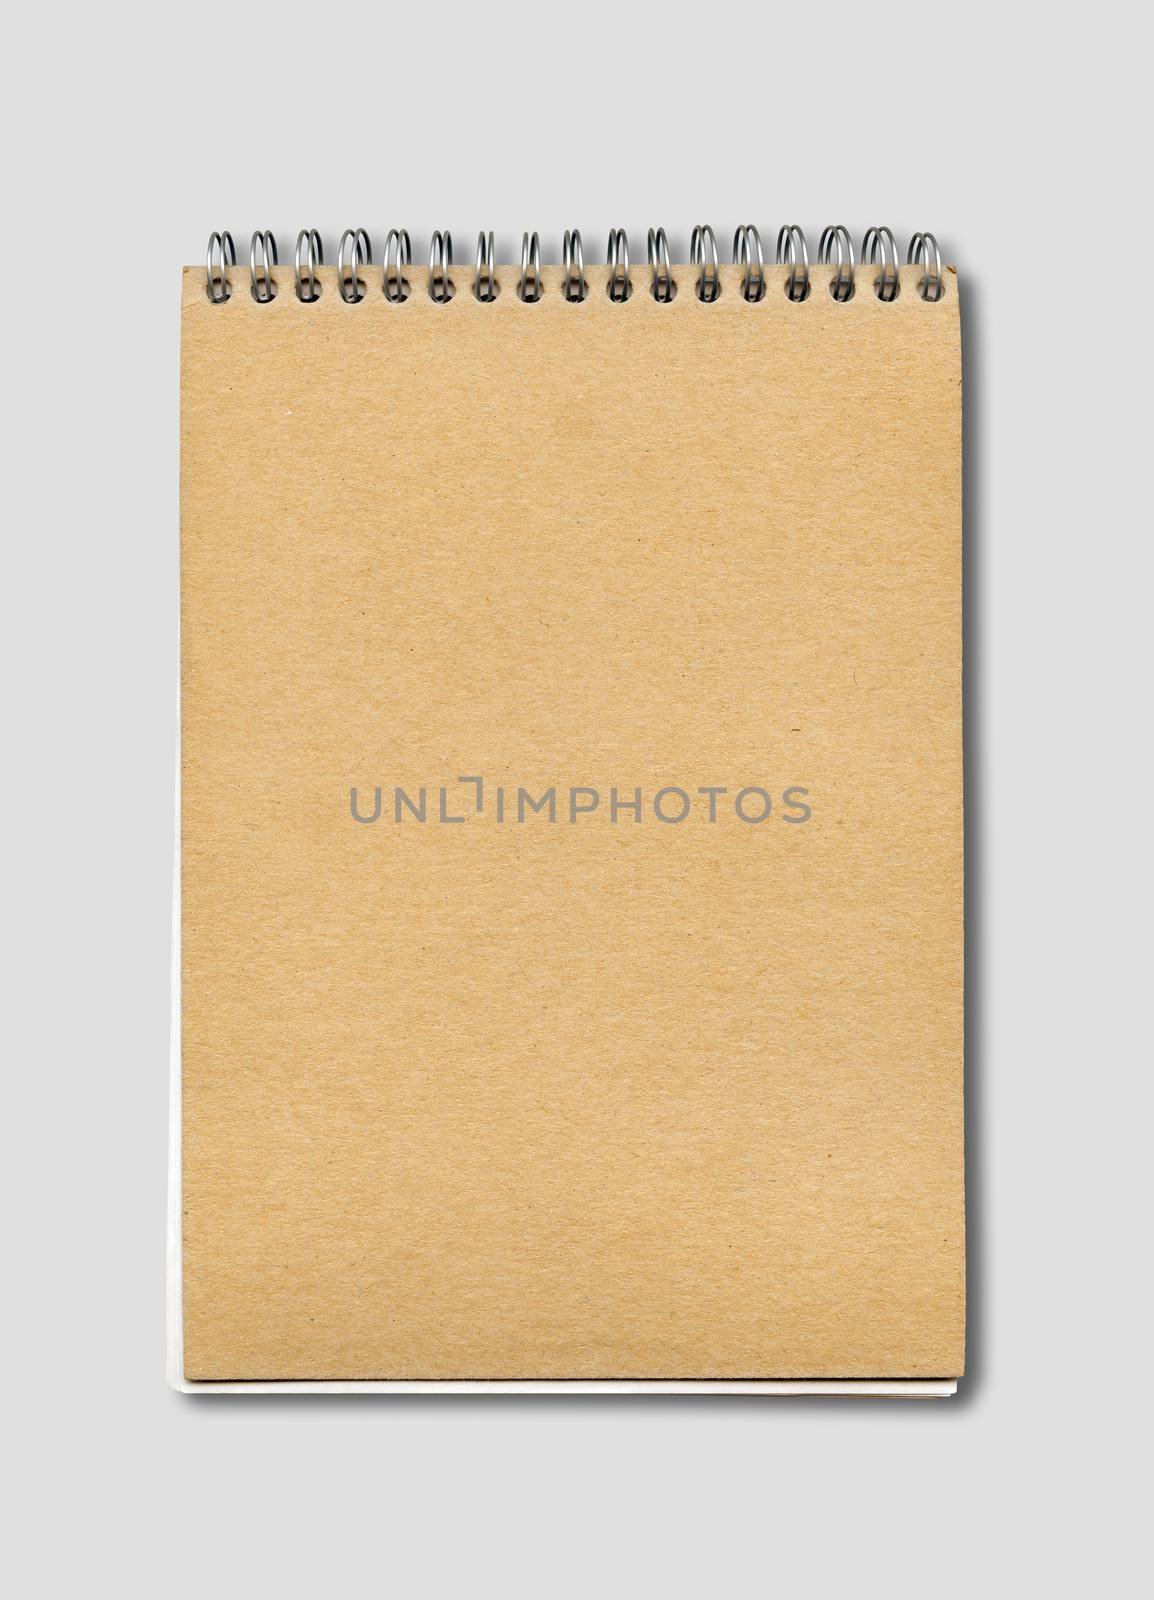 Spiral closed notebook mockup by daboost